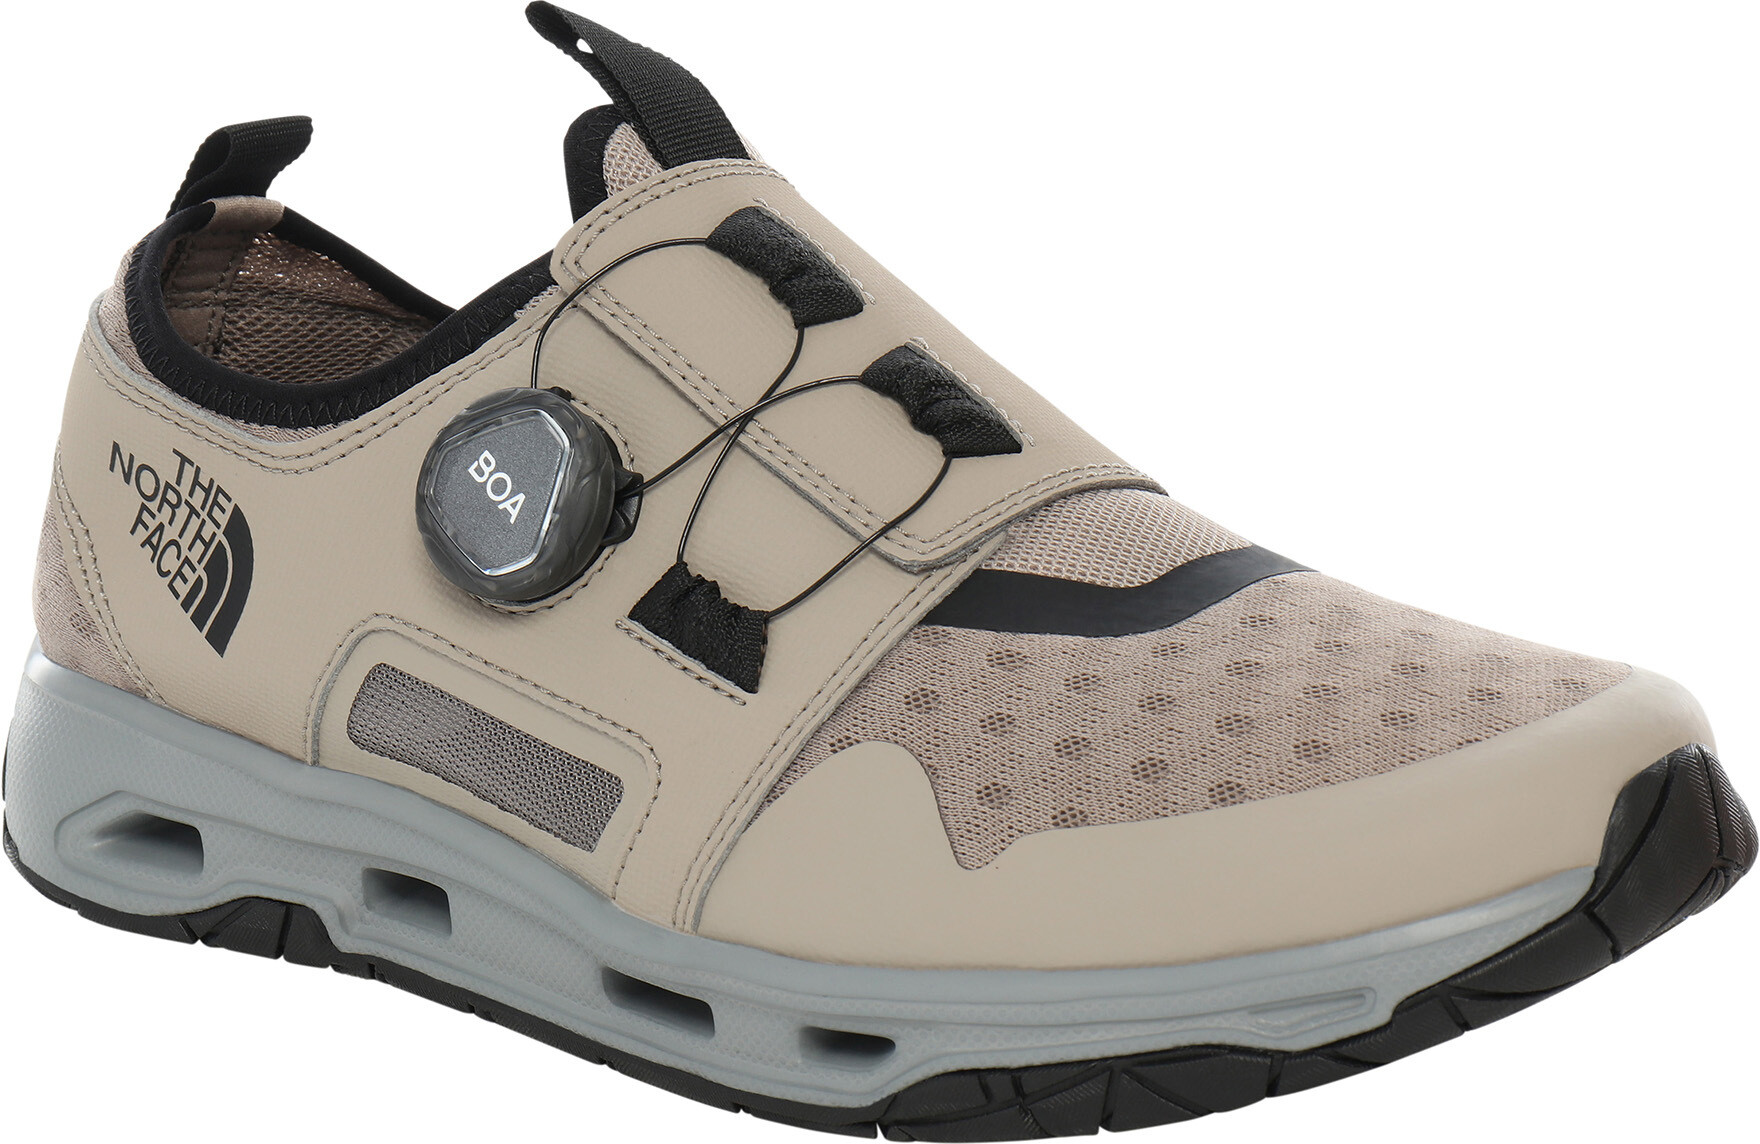 north face water shoes mens